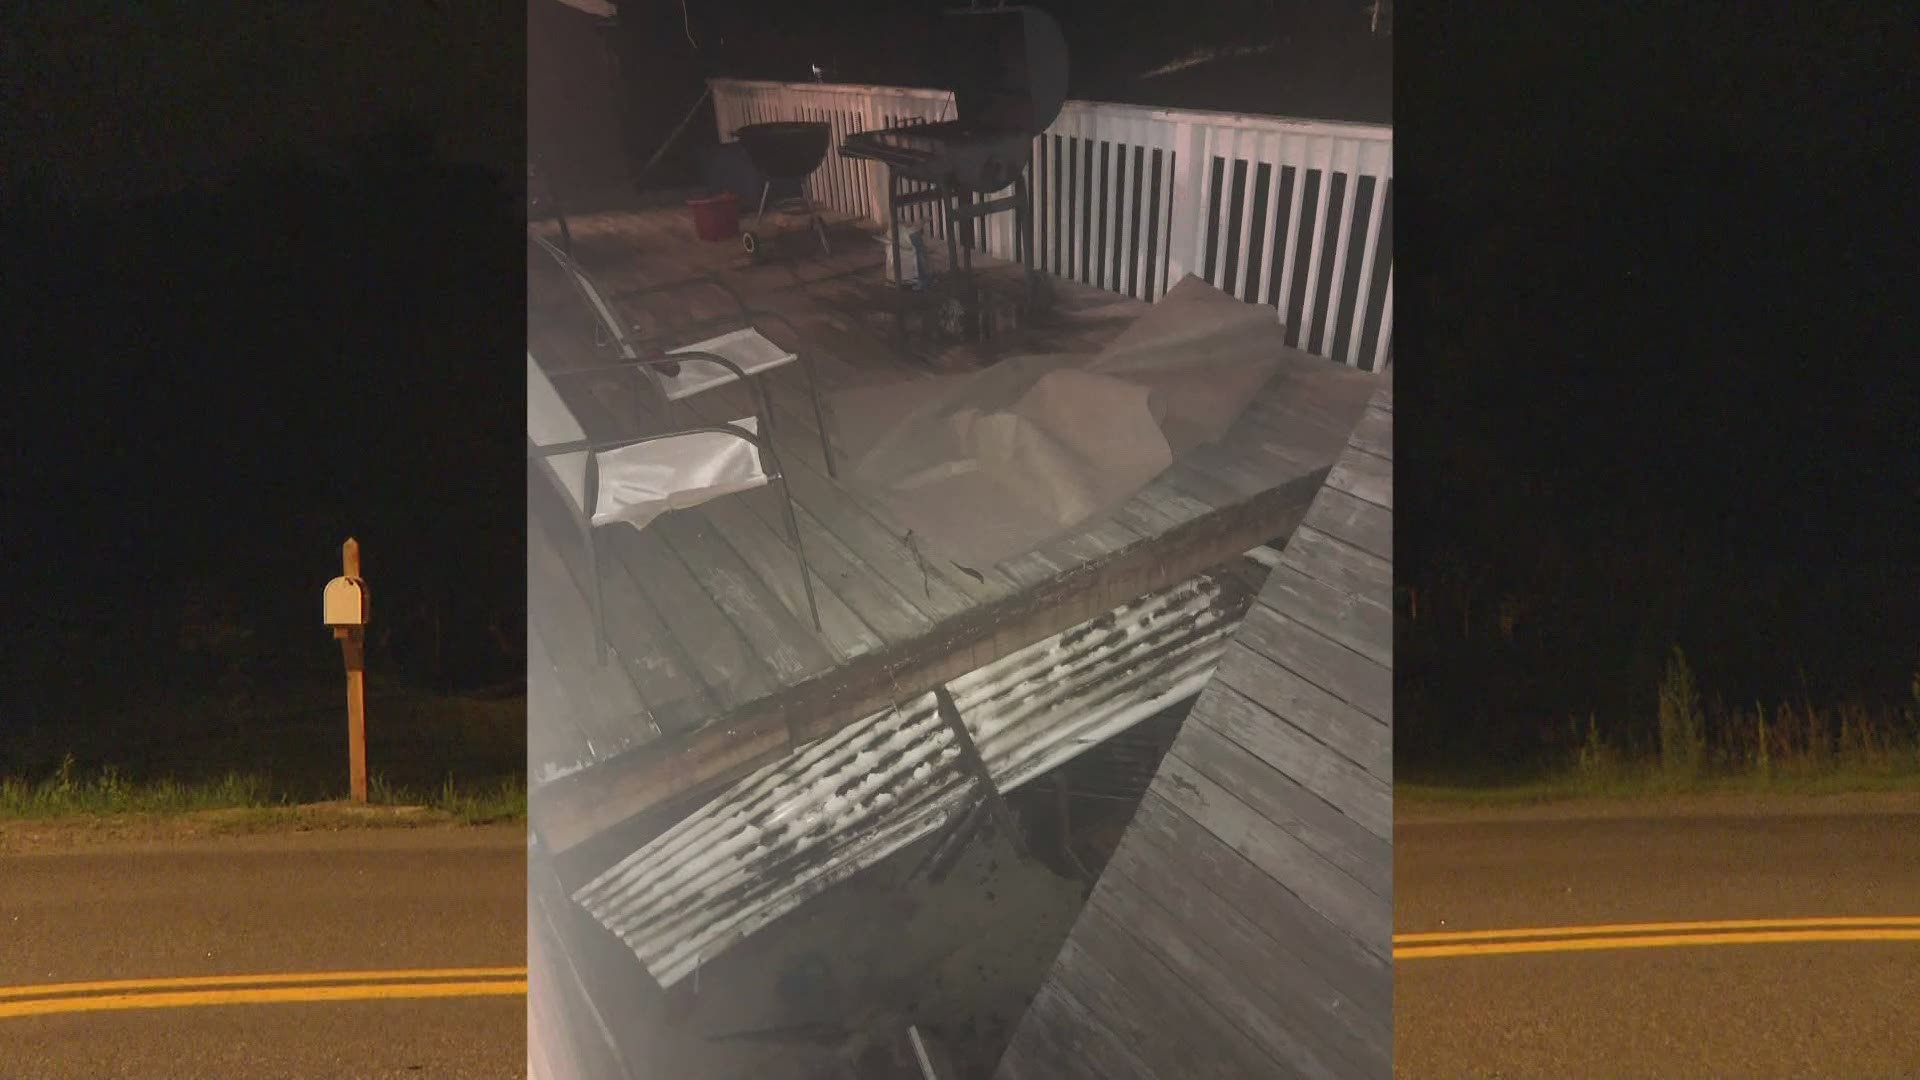 Westbrook fire chief Andrew Turcotte says 10 people were sitting on the deck, which was 10-12 feet off the ground when it collapsed Friday night.